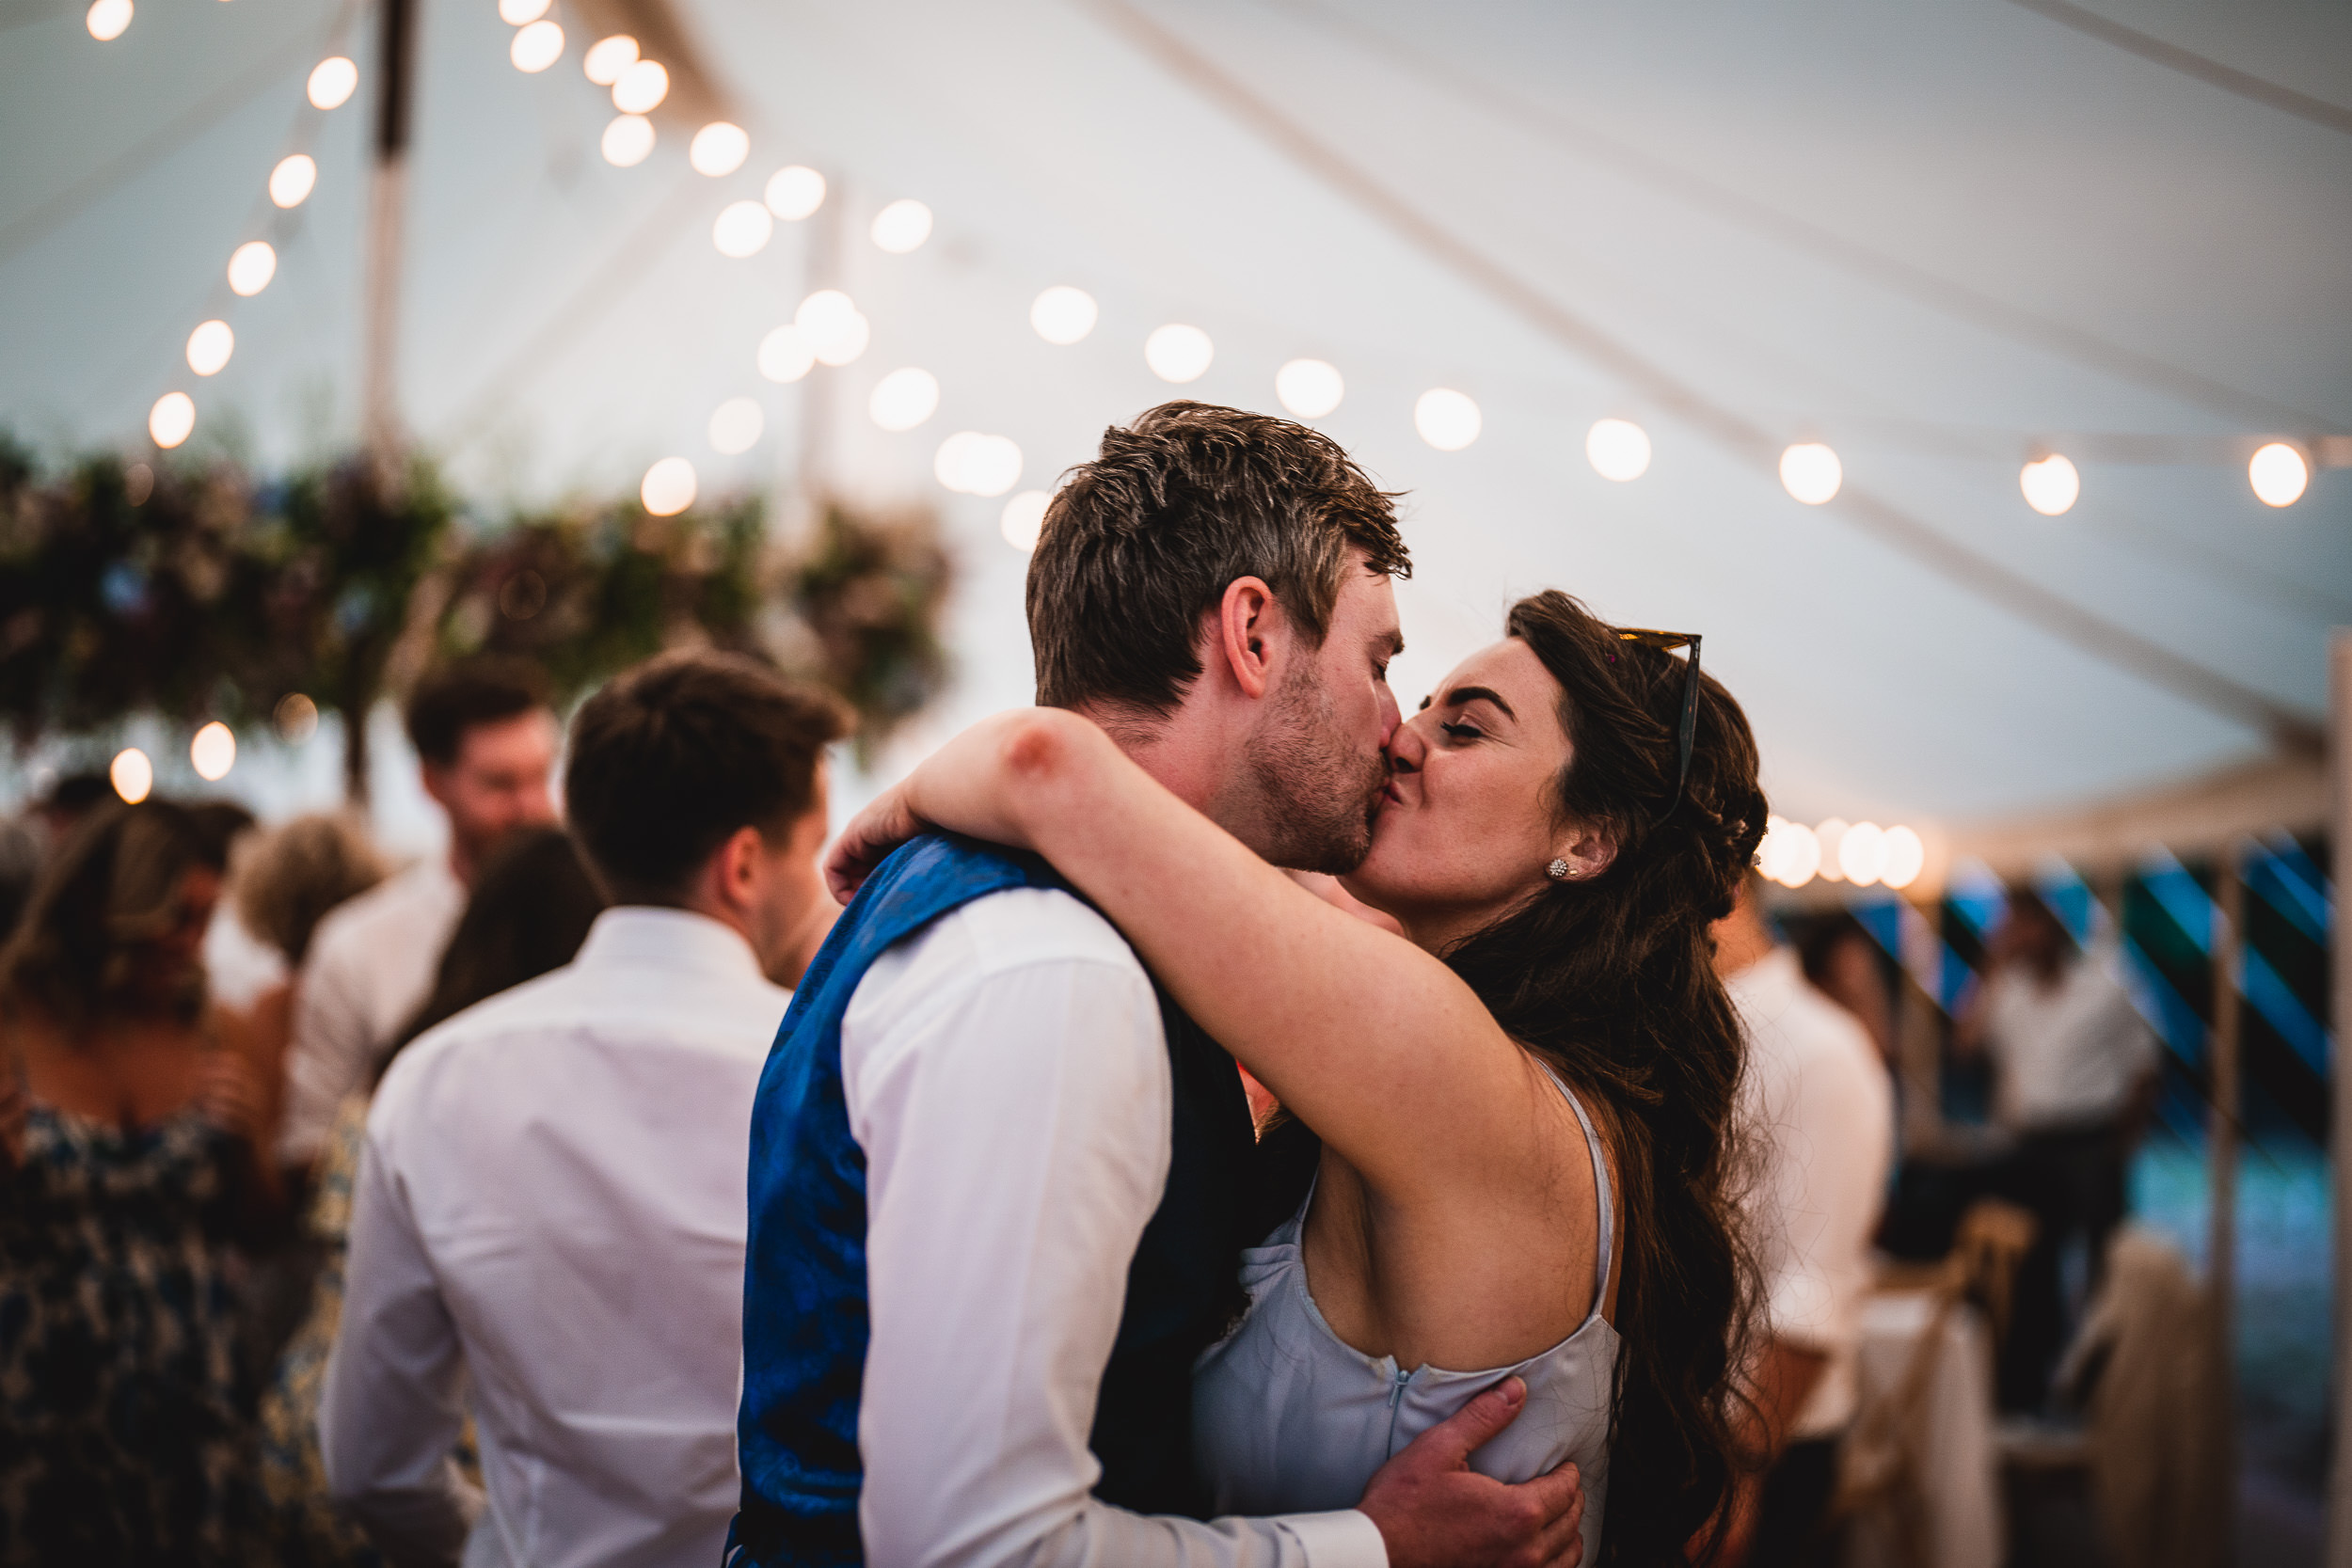 A wedding photo capturing the bride and groom's kiss under a tent.